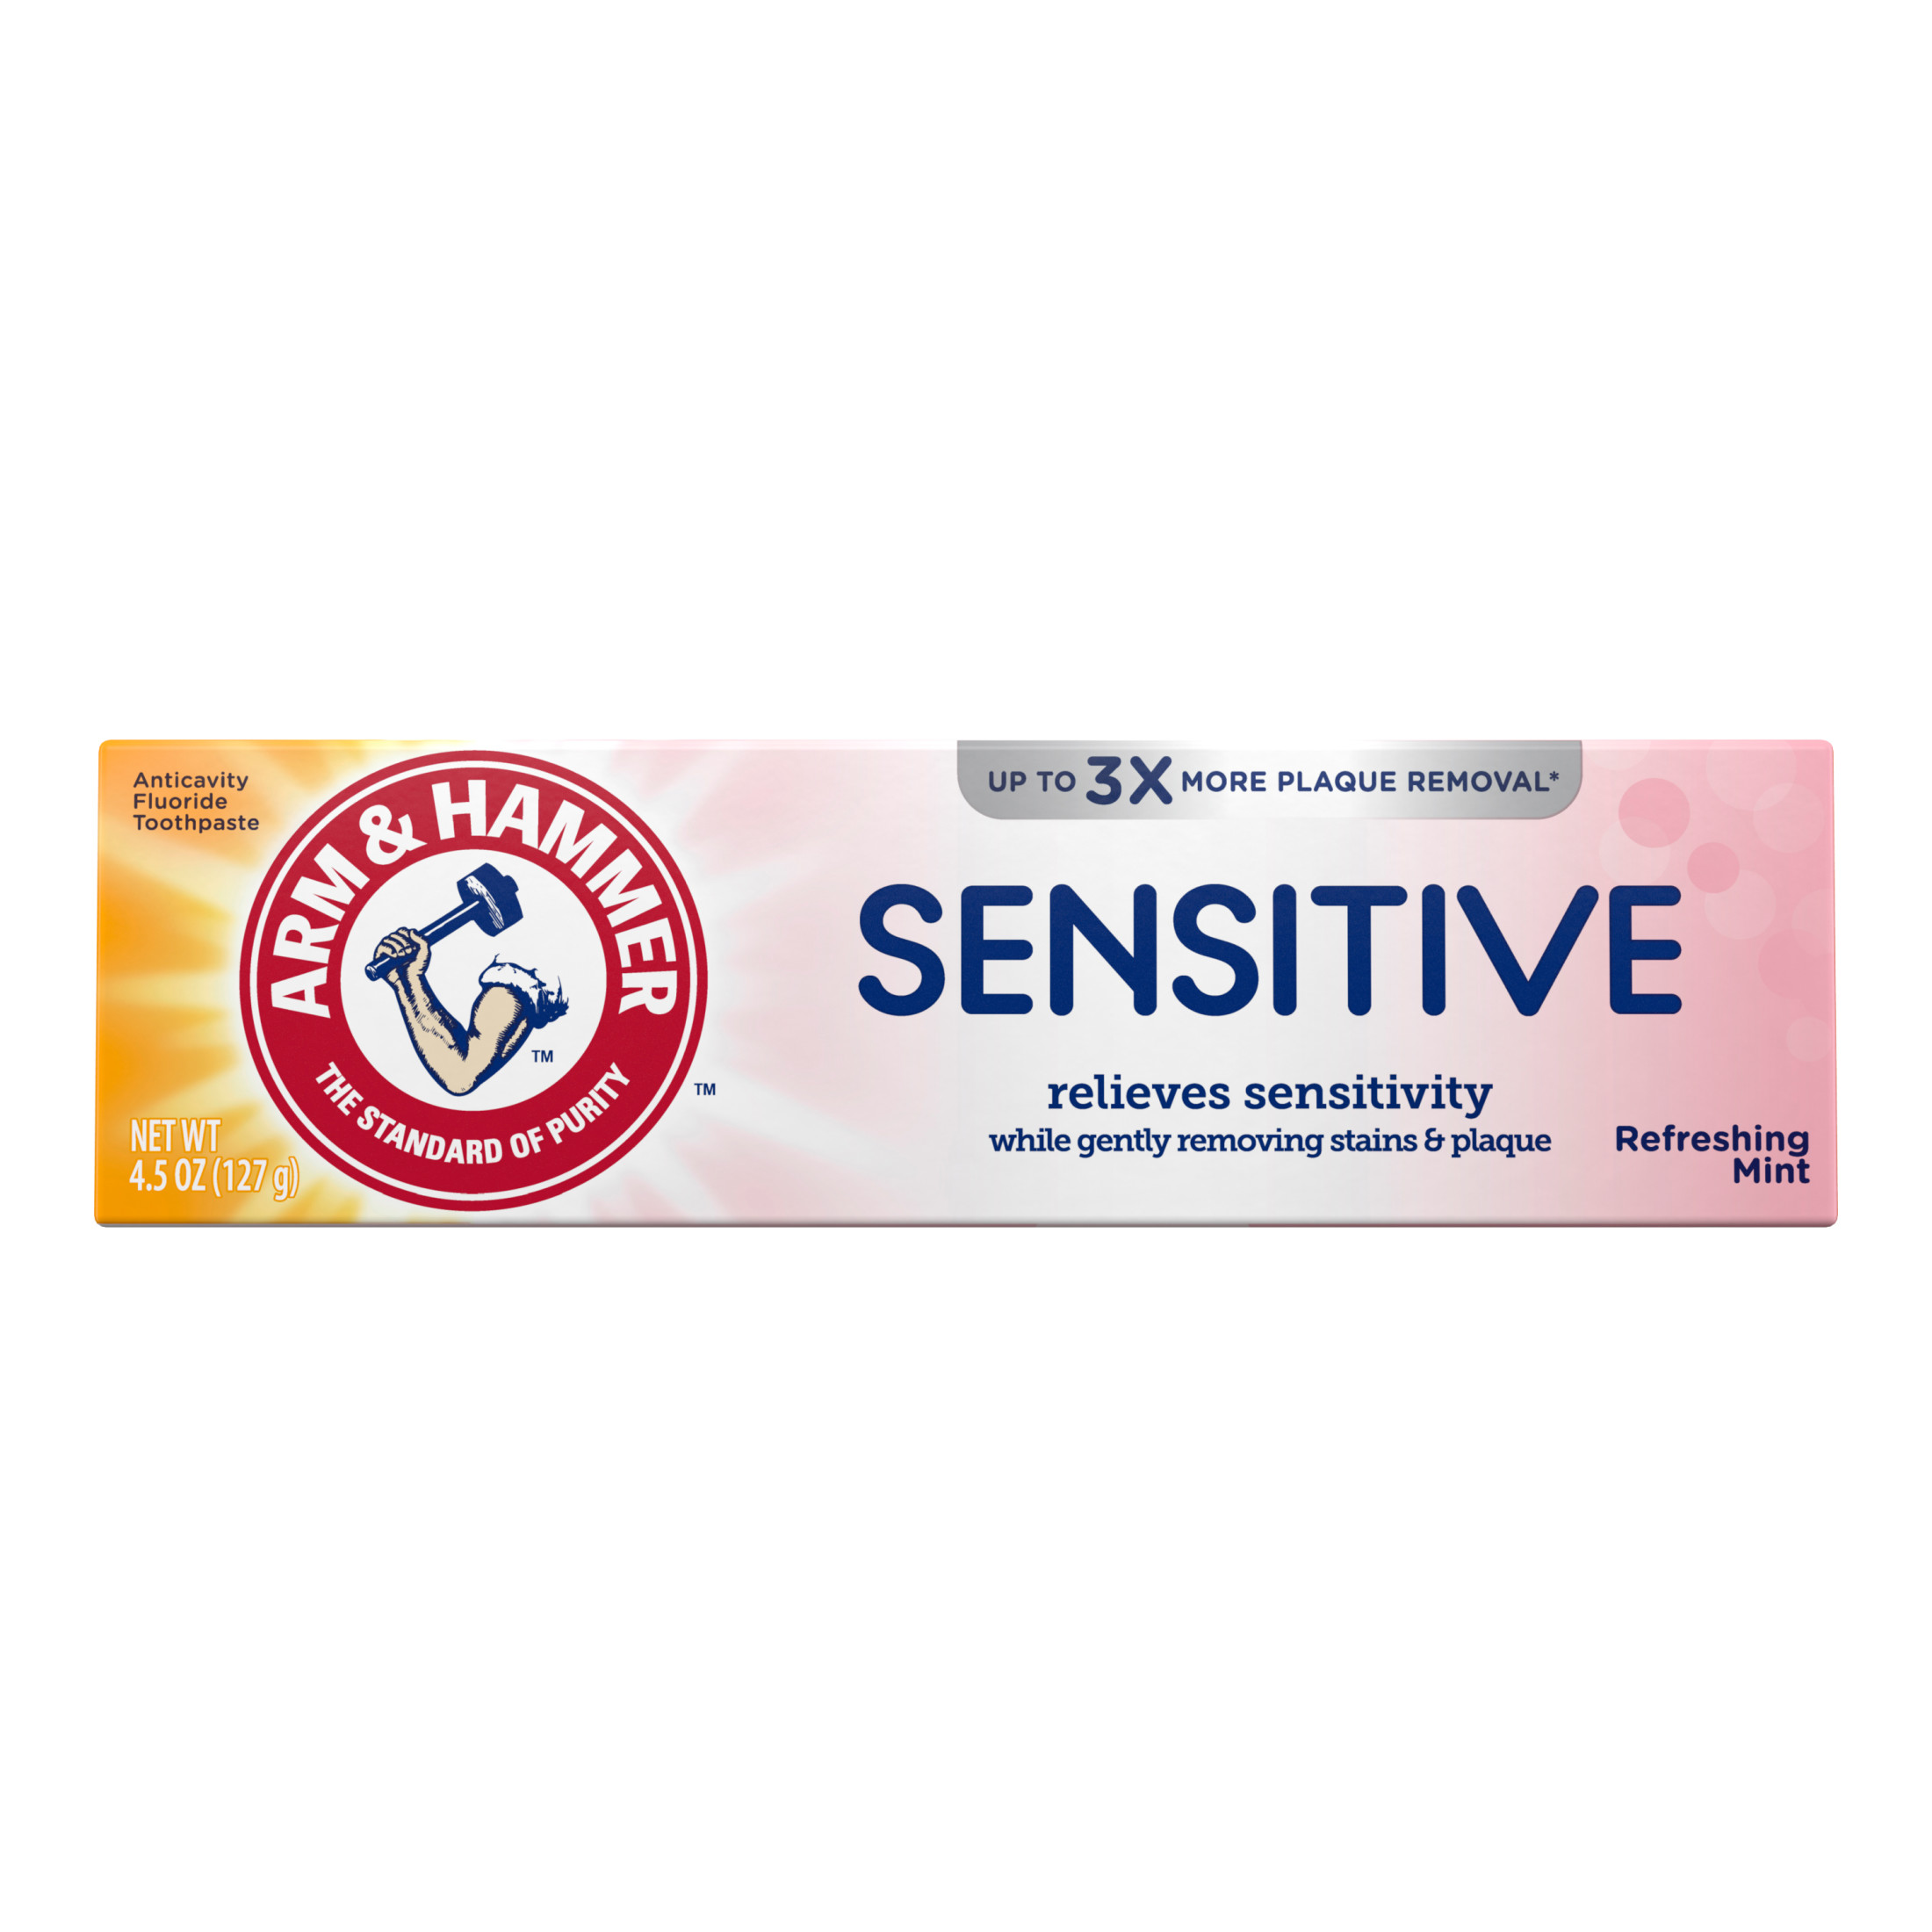 ARM & HAMMER Sensitive Teeth & Gums Toothpaste, Refreshing Mint- Fluoride Toothpaste - image 1 of 10